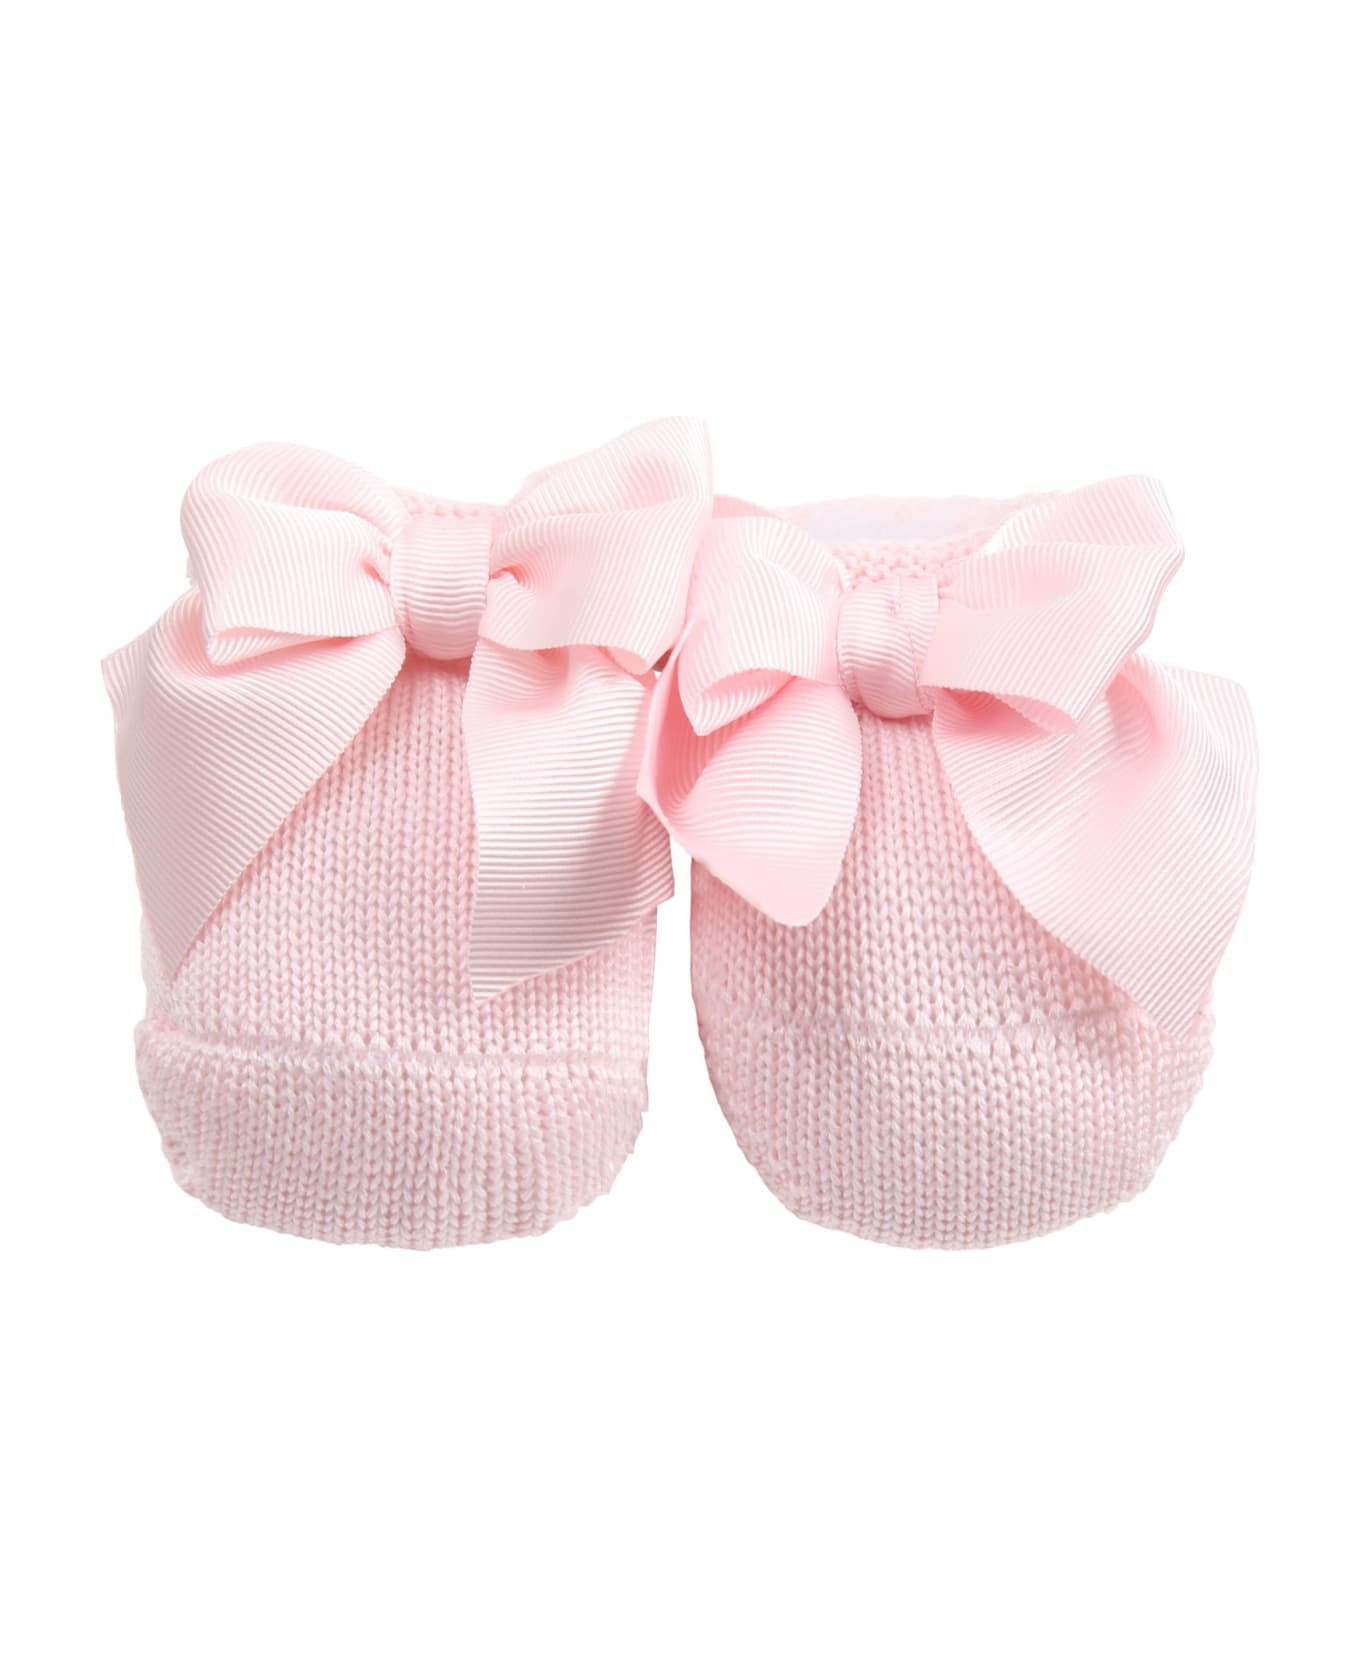 Story Loris Pink Baby Bootee For Babygirl - Pink アクセサリー＆ギフト